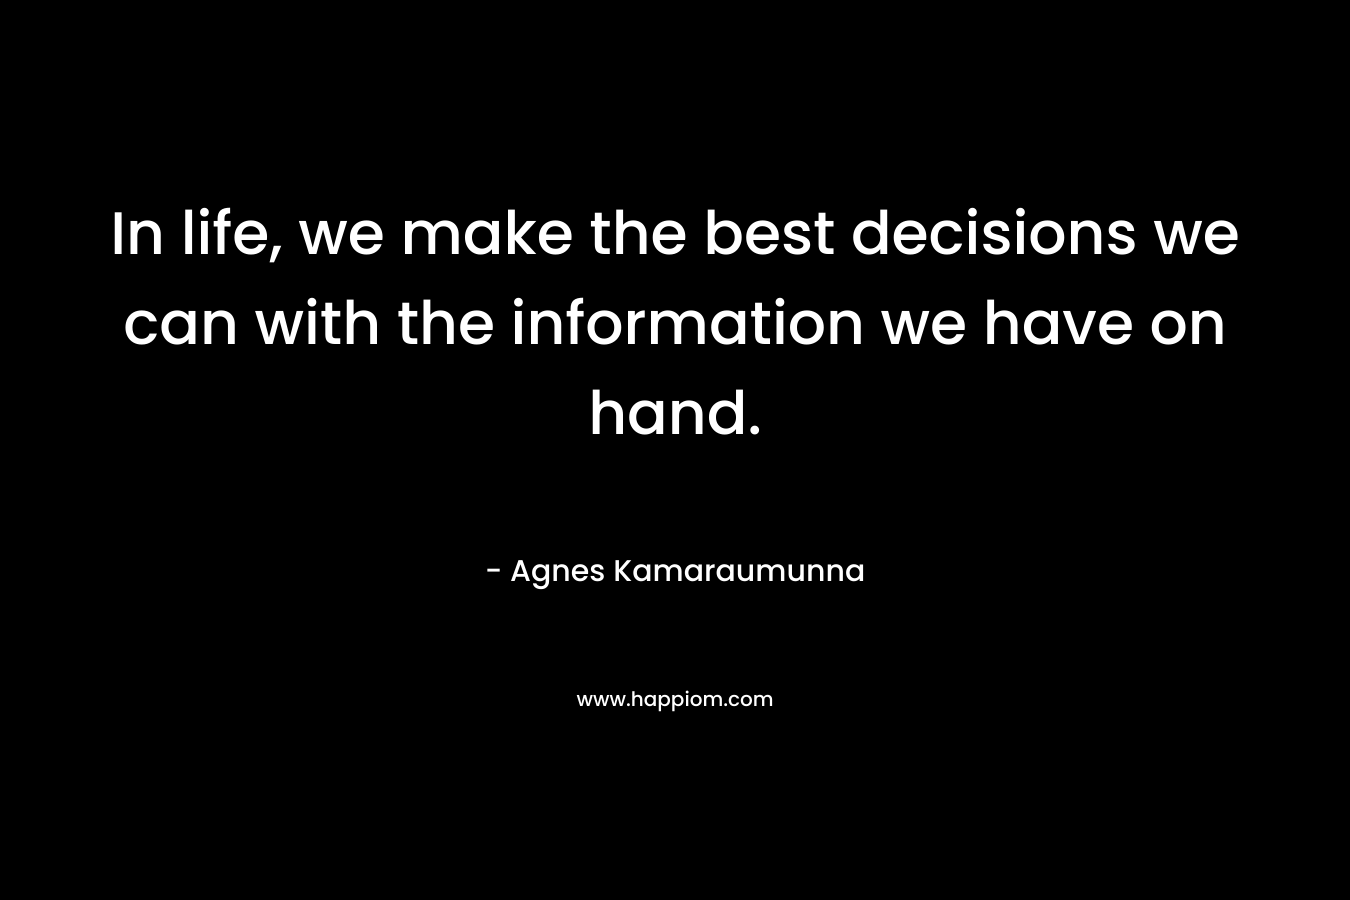 In life, we make the best decisions we can with the information we have on hand.